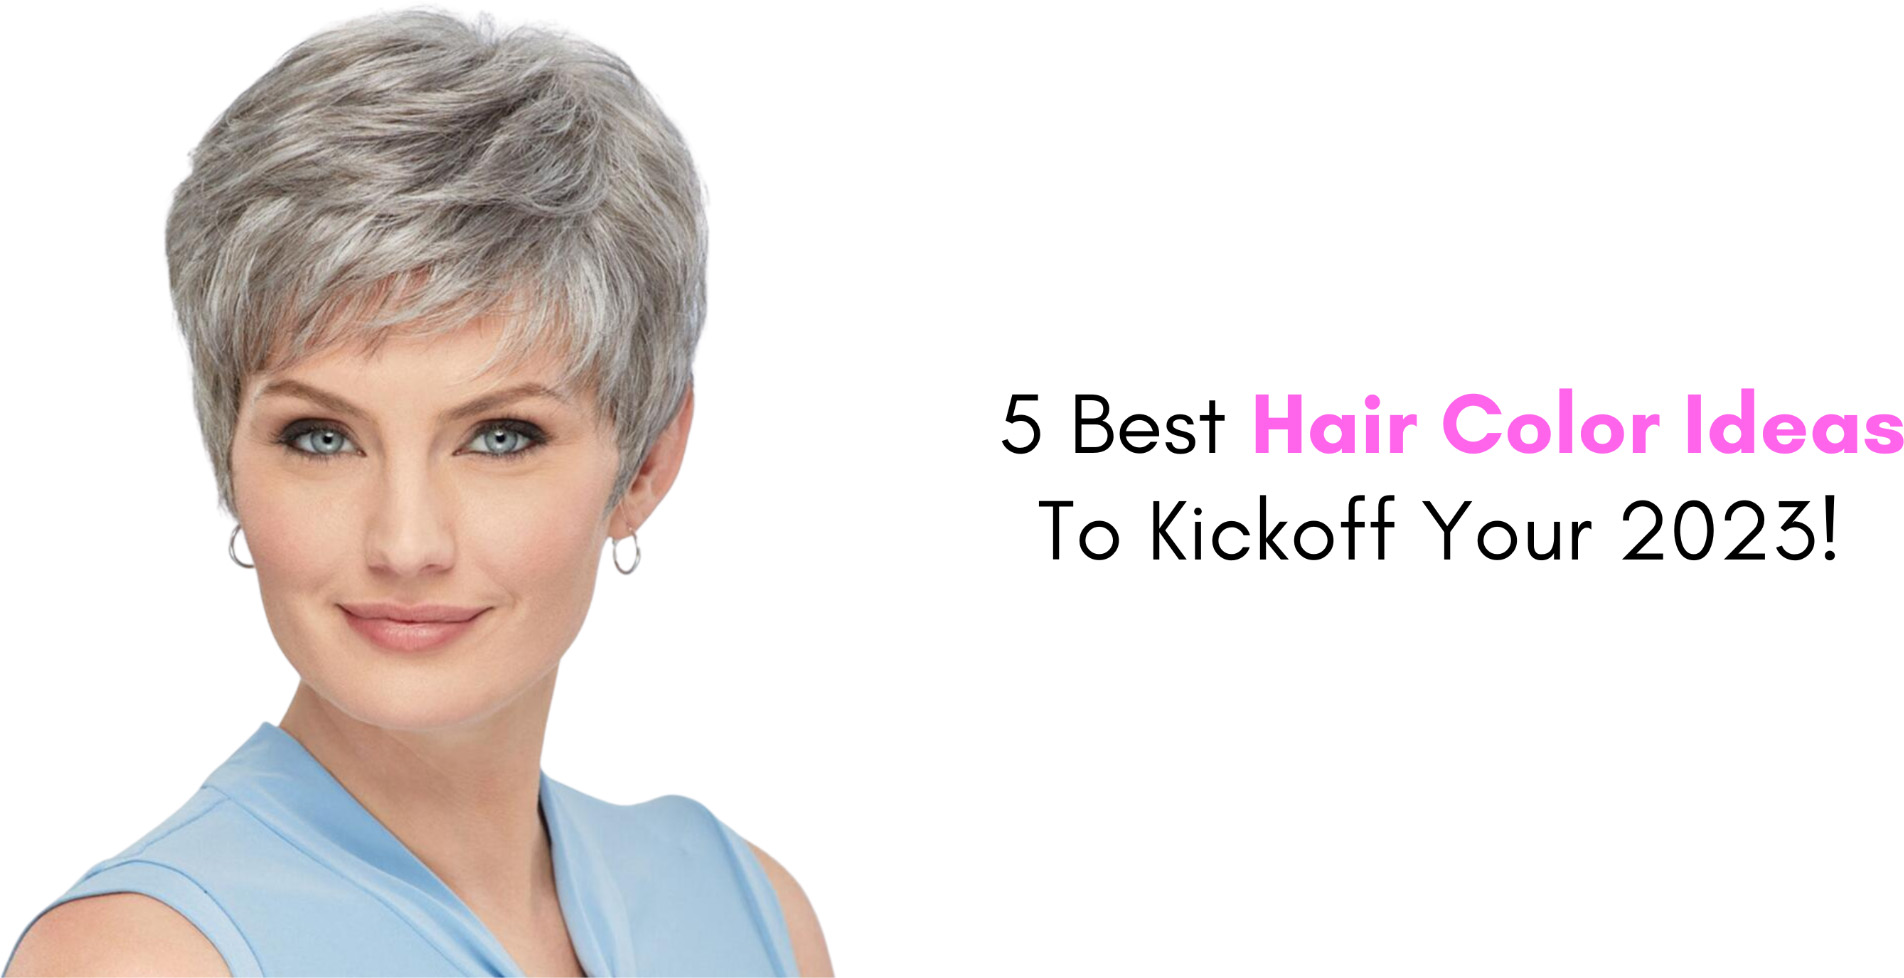 5 Best Hair Color Ideas To Kickoff Your 2023!